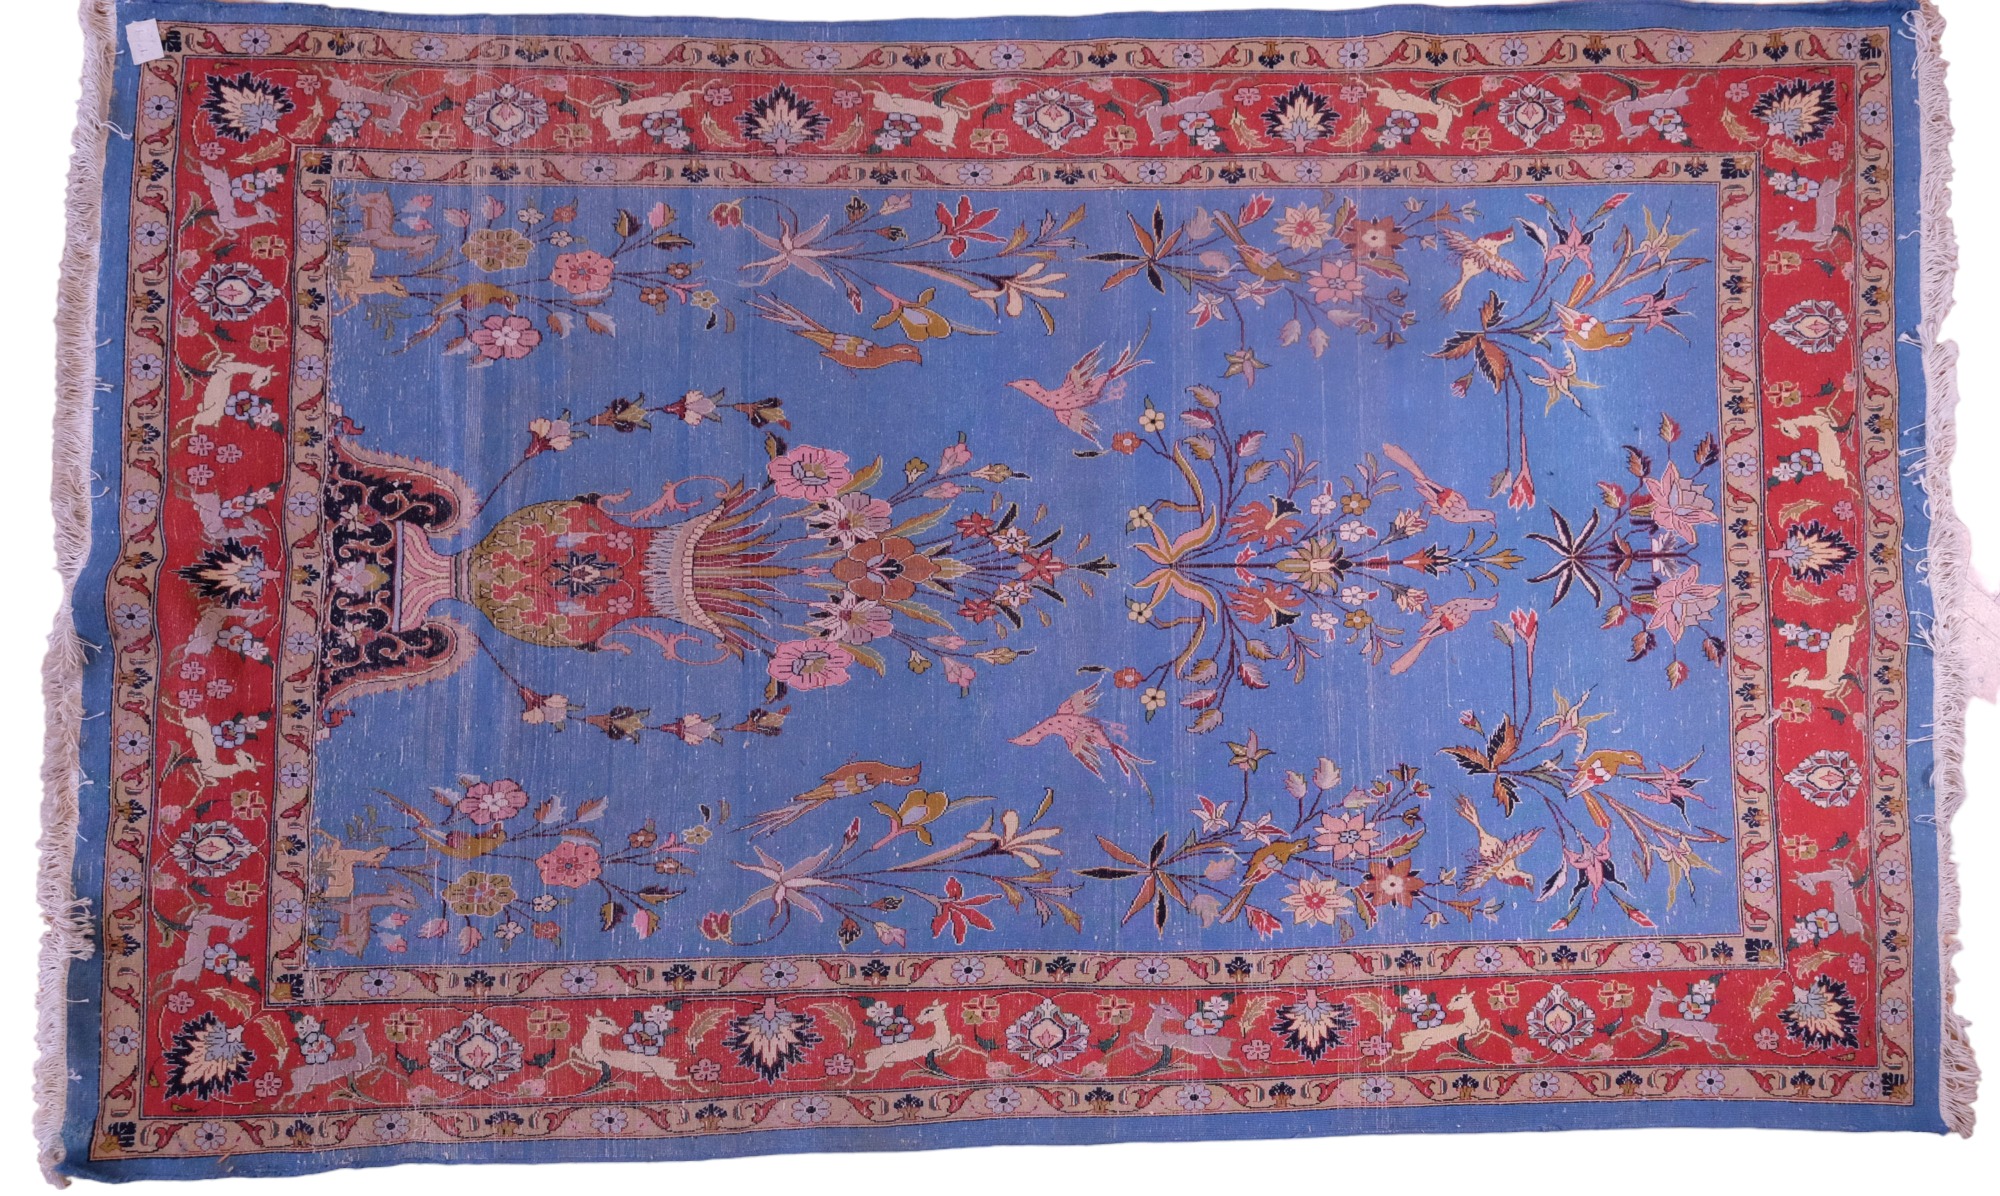 A very fine antique Persian Sarough / Zaronim hand-knotted wool-pile rug, decorated with deer, fawn, - Image 10 of 10